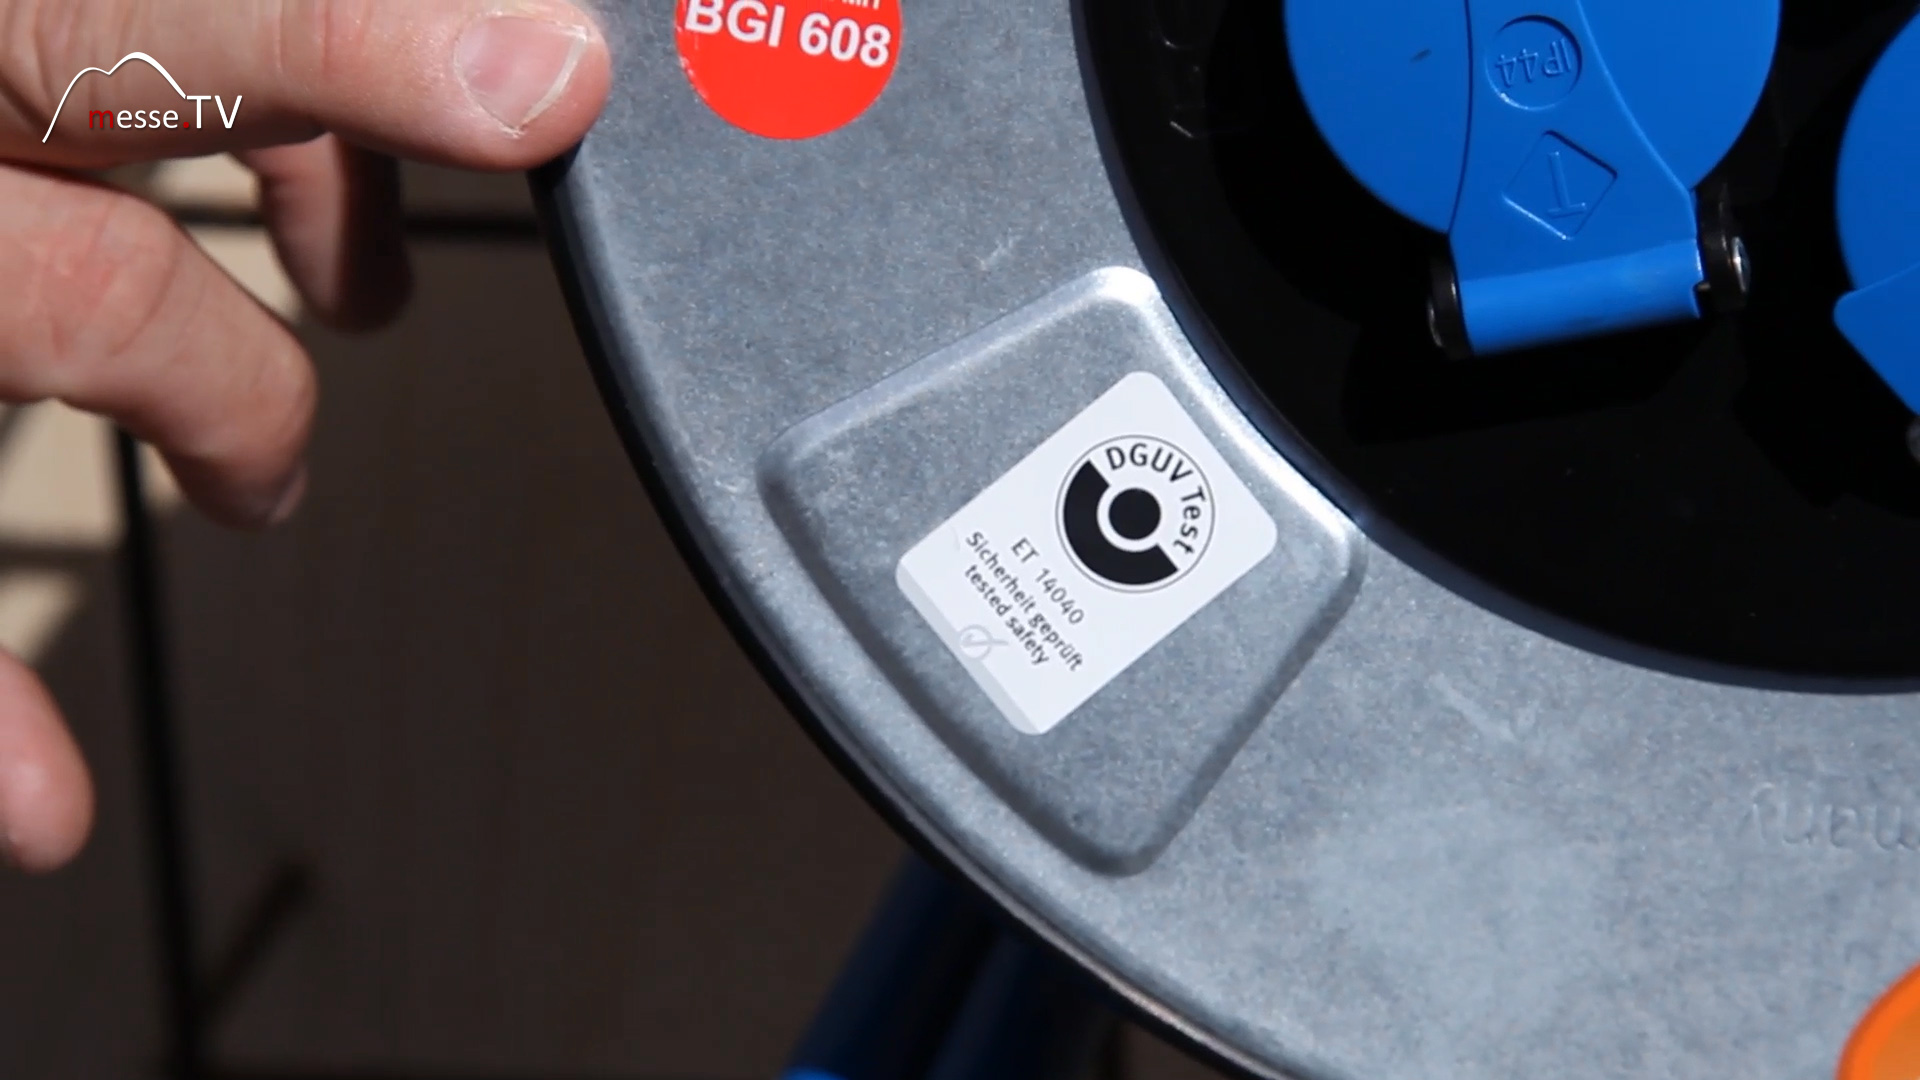 Metal cable reel safety tested as Schwabe